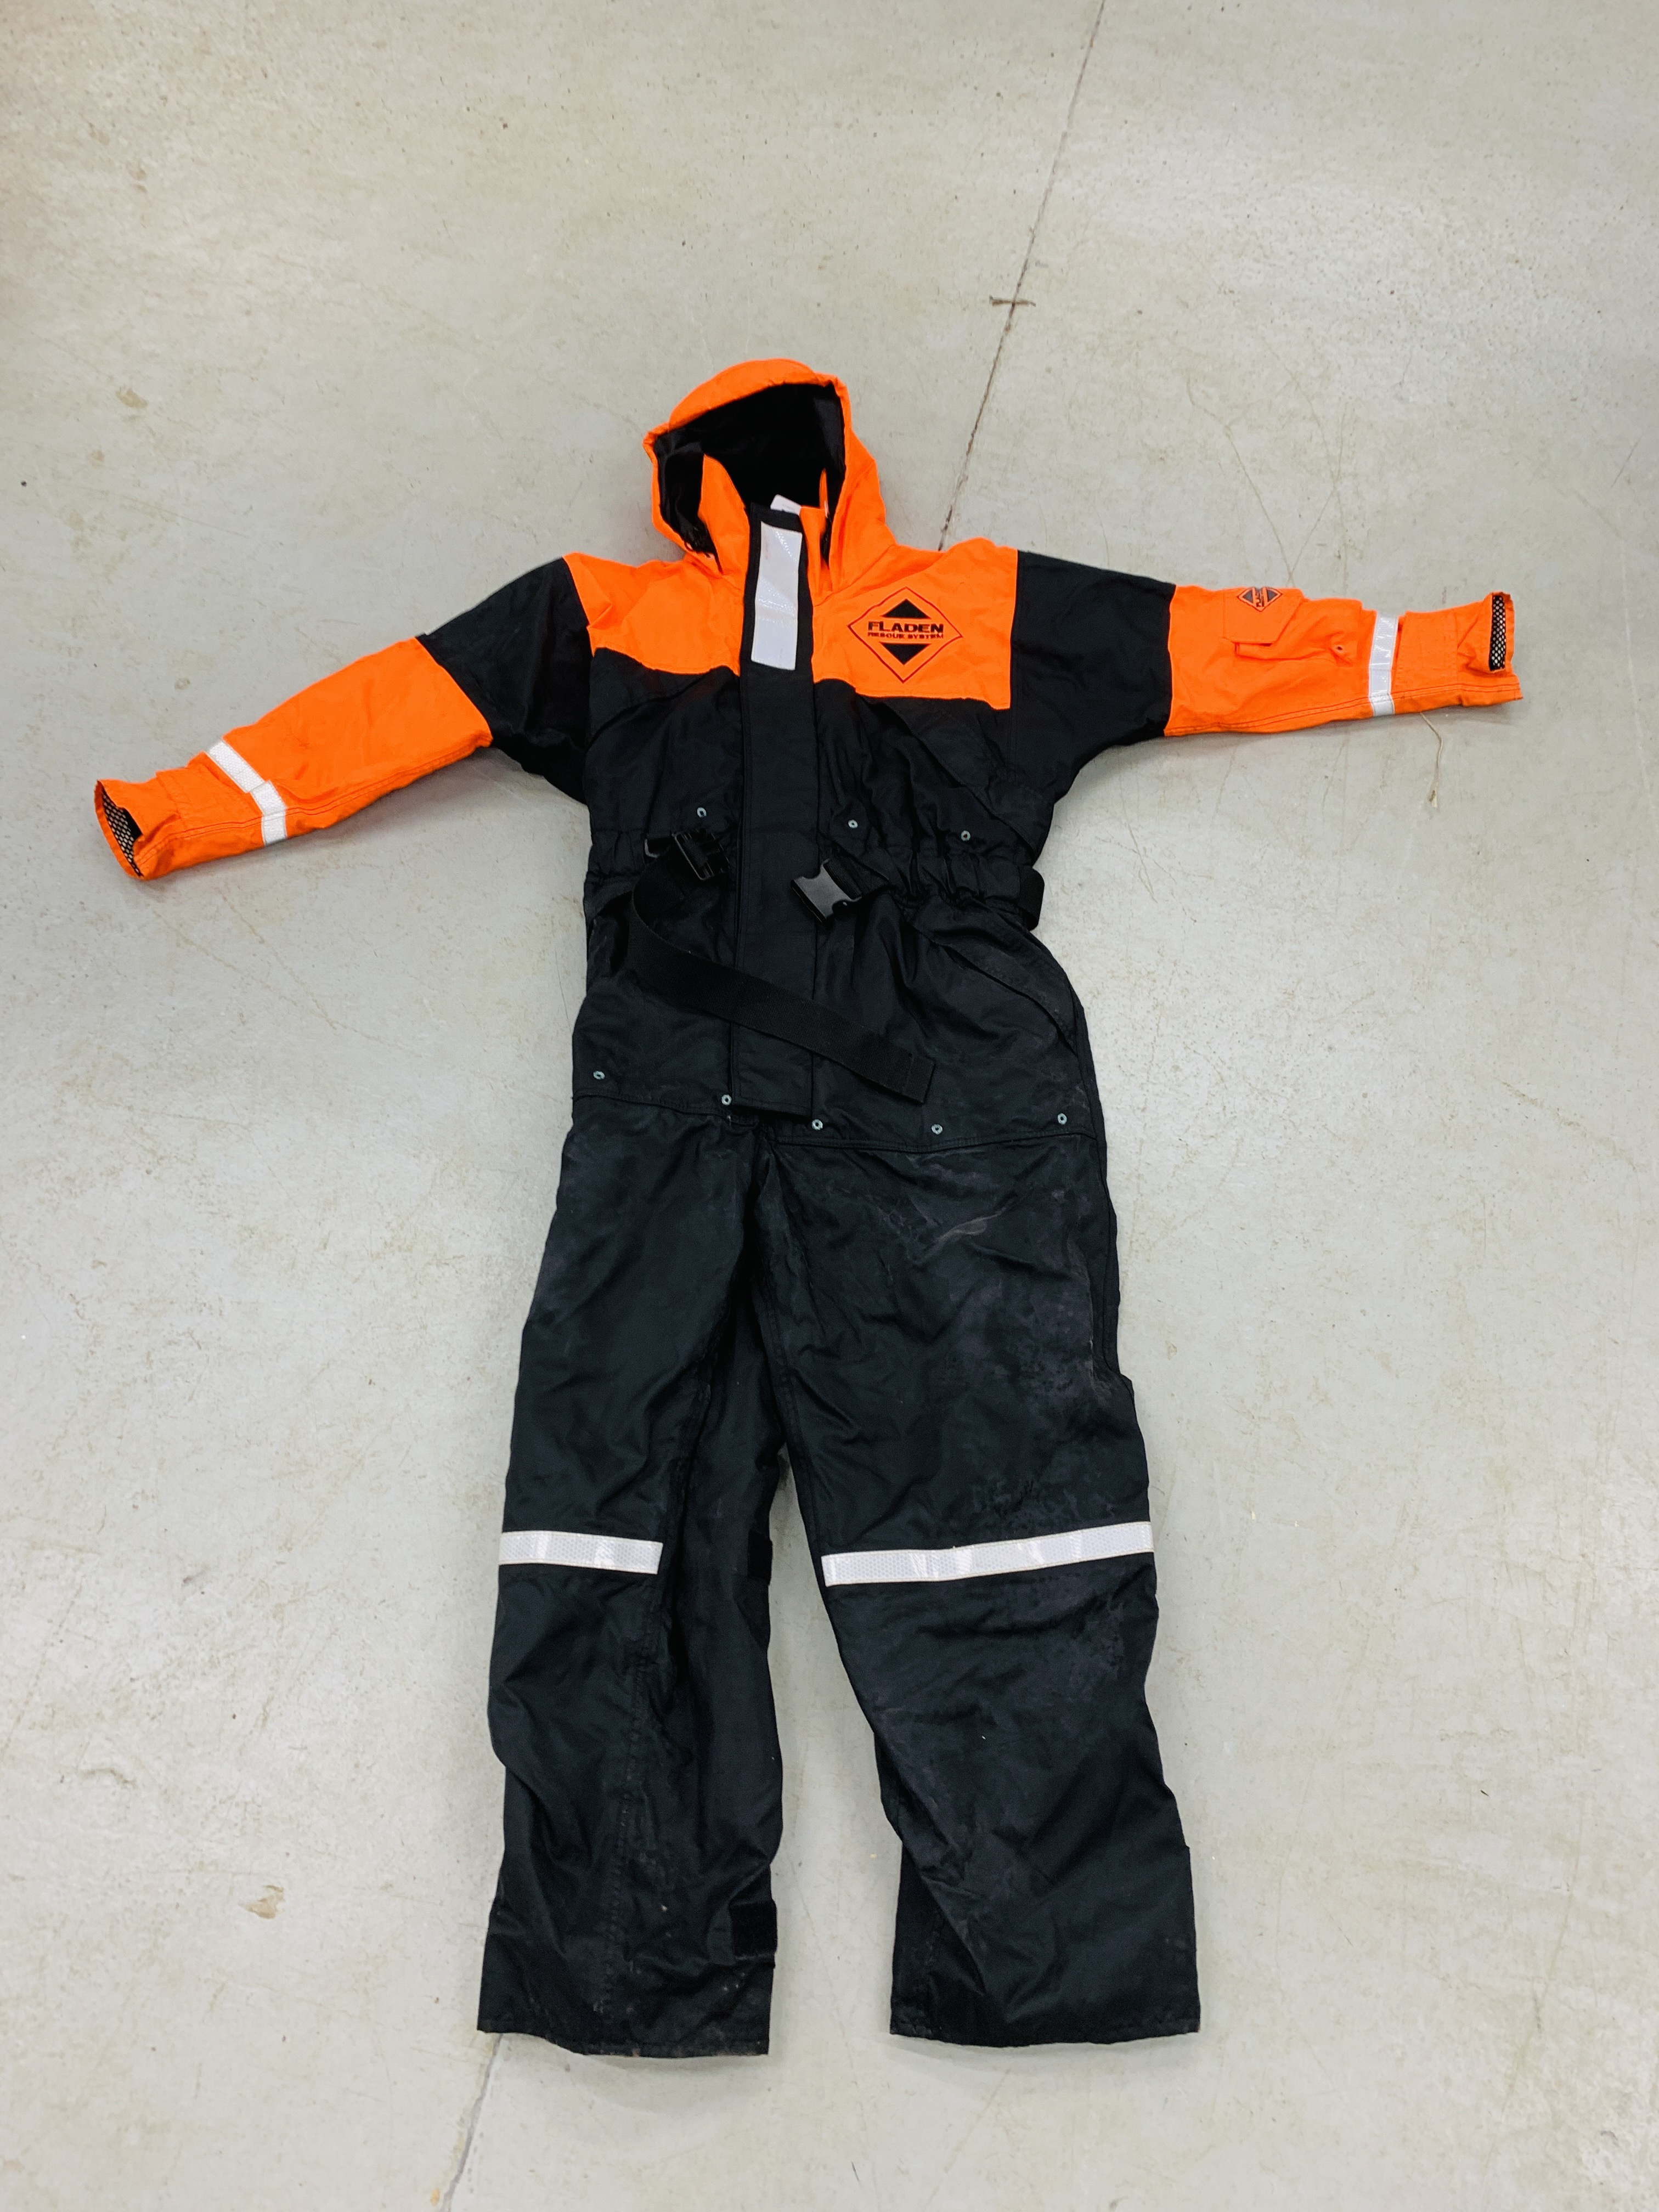 A FLADEN RESCUE SYSTEM FULL BODY SUIT SIZE LARGE (ORANGE AND BLACK)